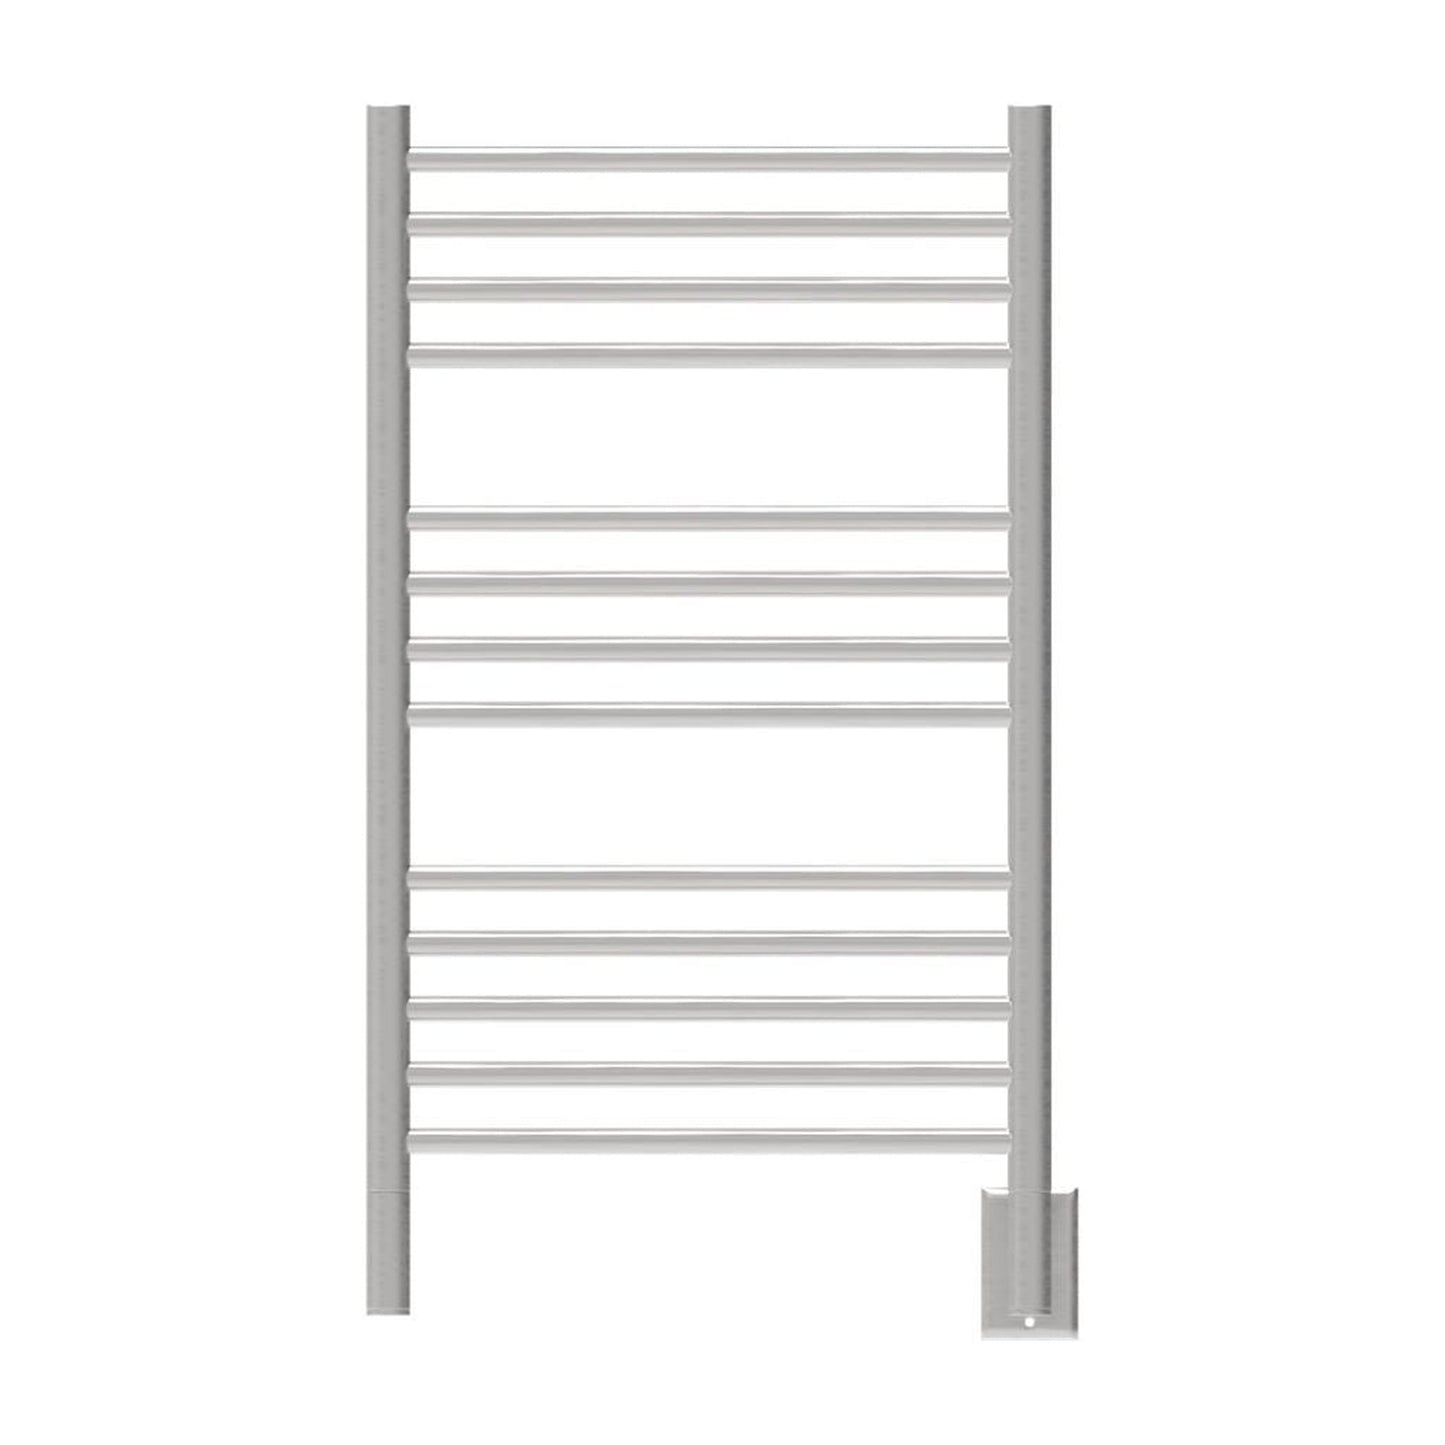 Amba Jeeves C Straight 13-Bar Brushed Stainless Steel Finish Hardwired Towel Warmer